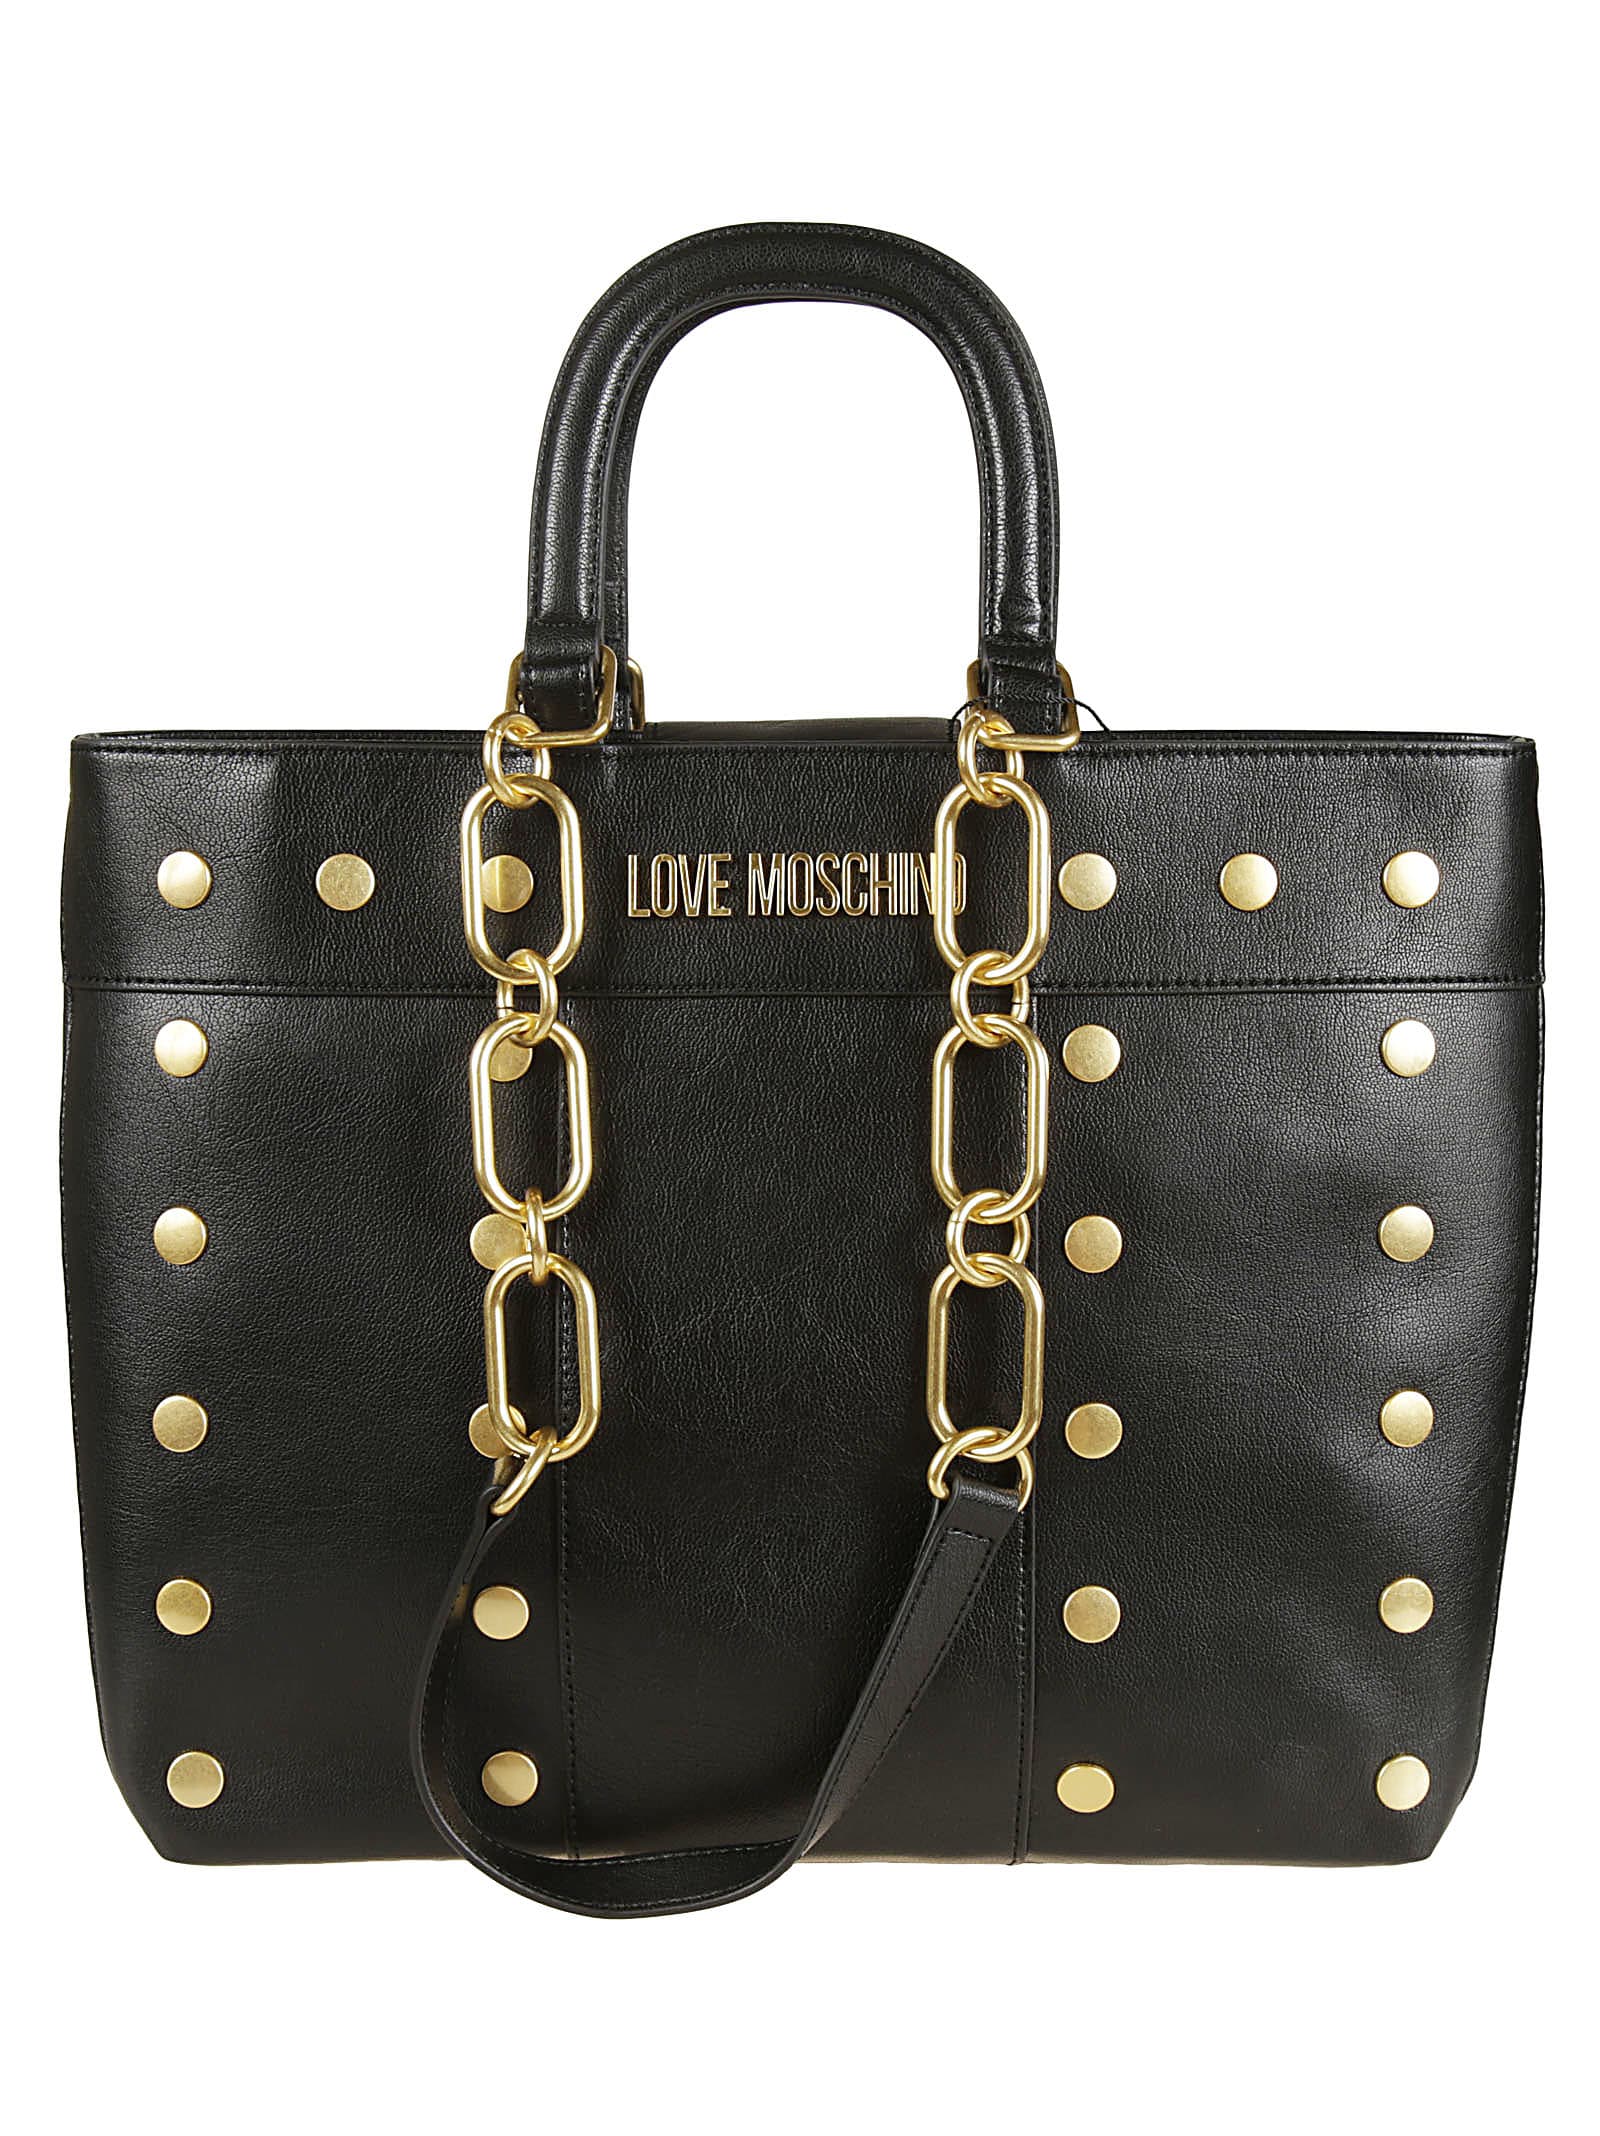 Love Moschino Studded Top Handle Chain Tote